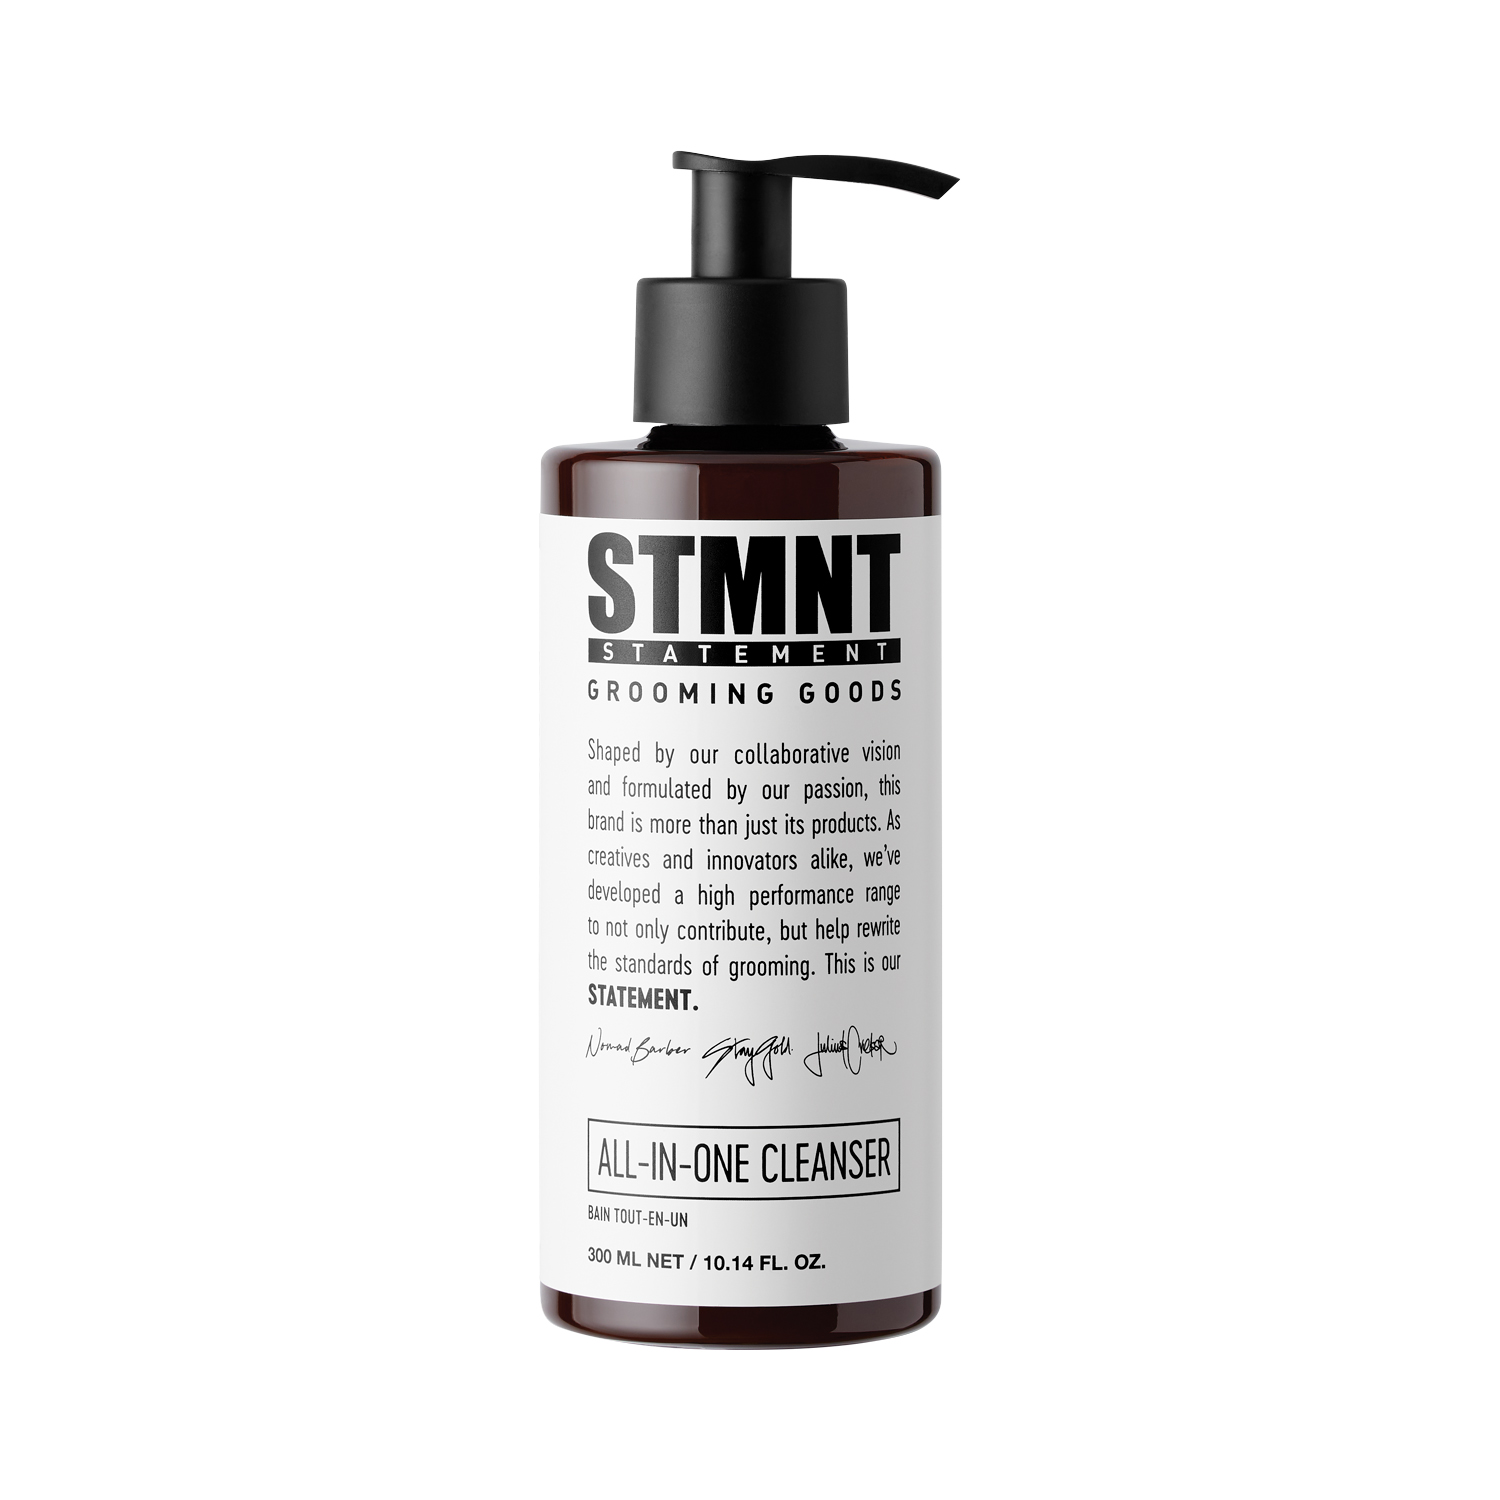 STMNT - All-in-One Cleanser